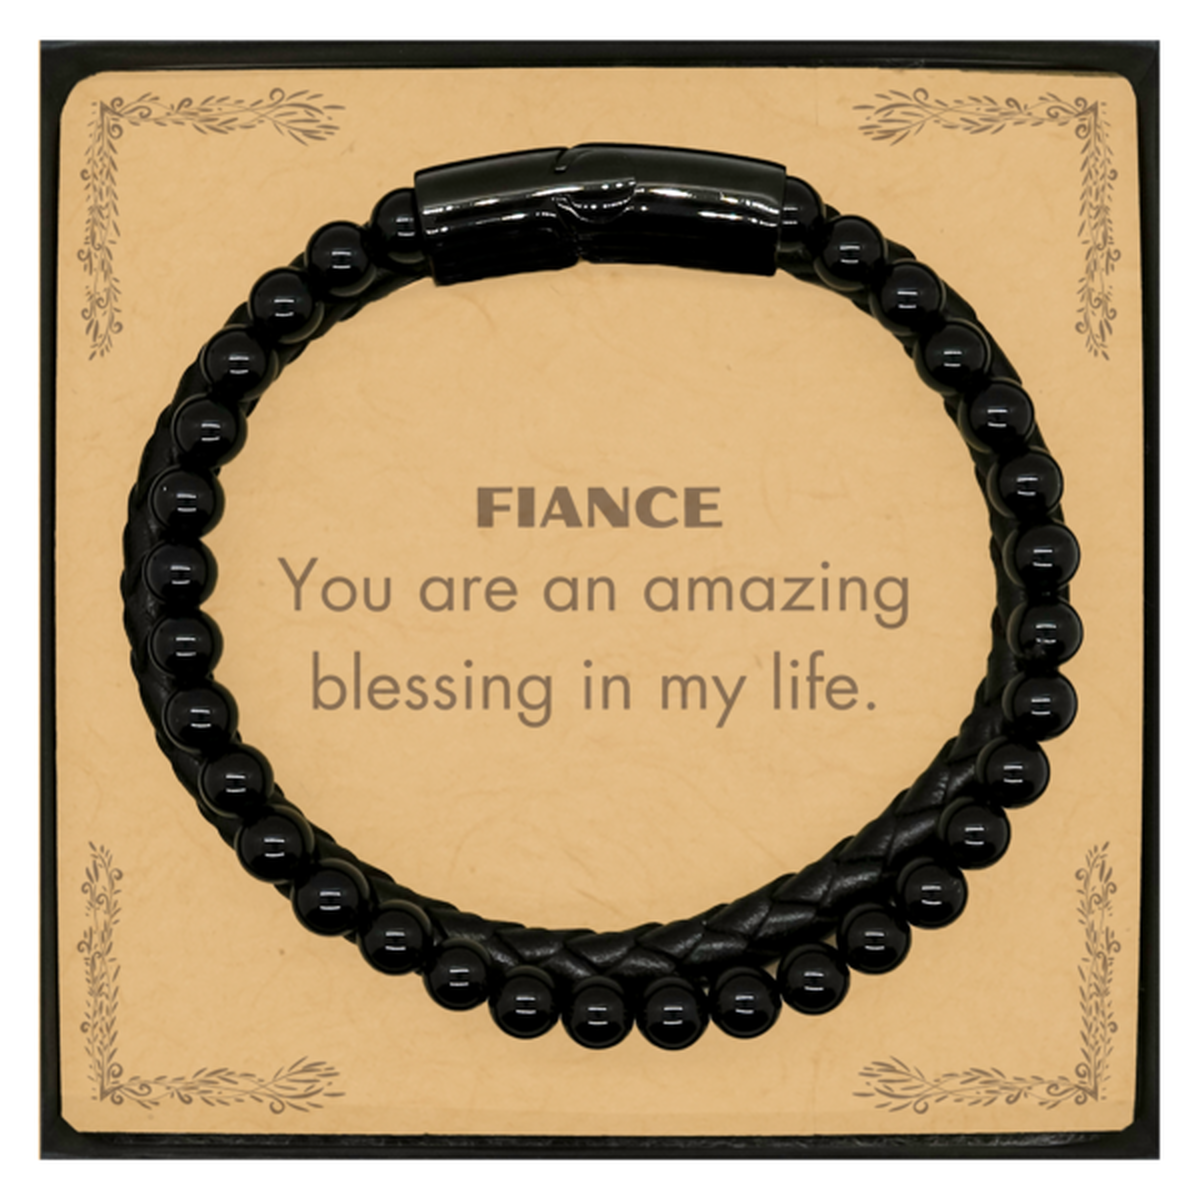 Fiance Stone Leather Bracelets, You are an amazing blessing in my life, Thank You Gifts For Fiance, Inspirational Birthday Christmas Unique Gifts For Fiance